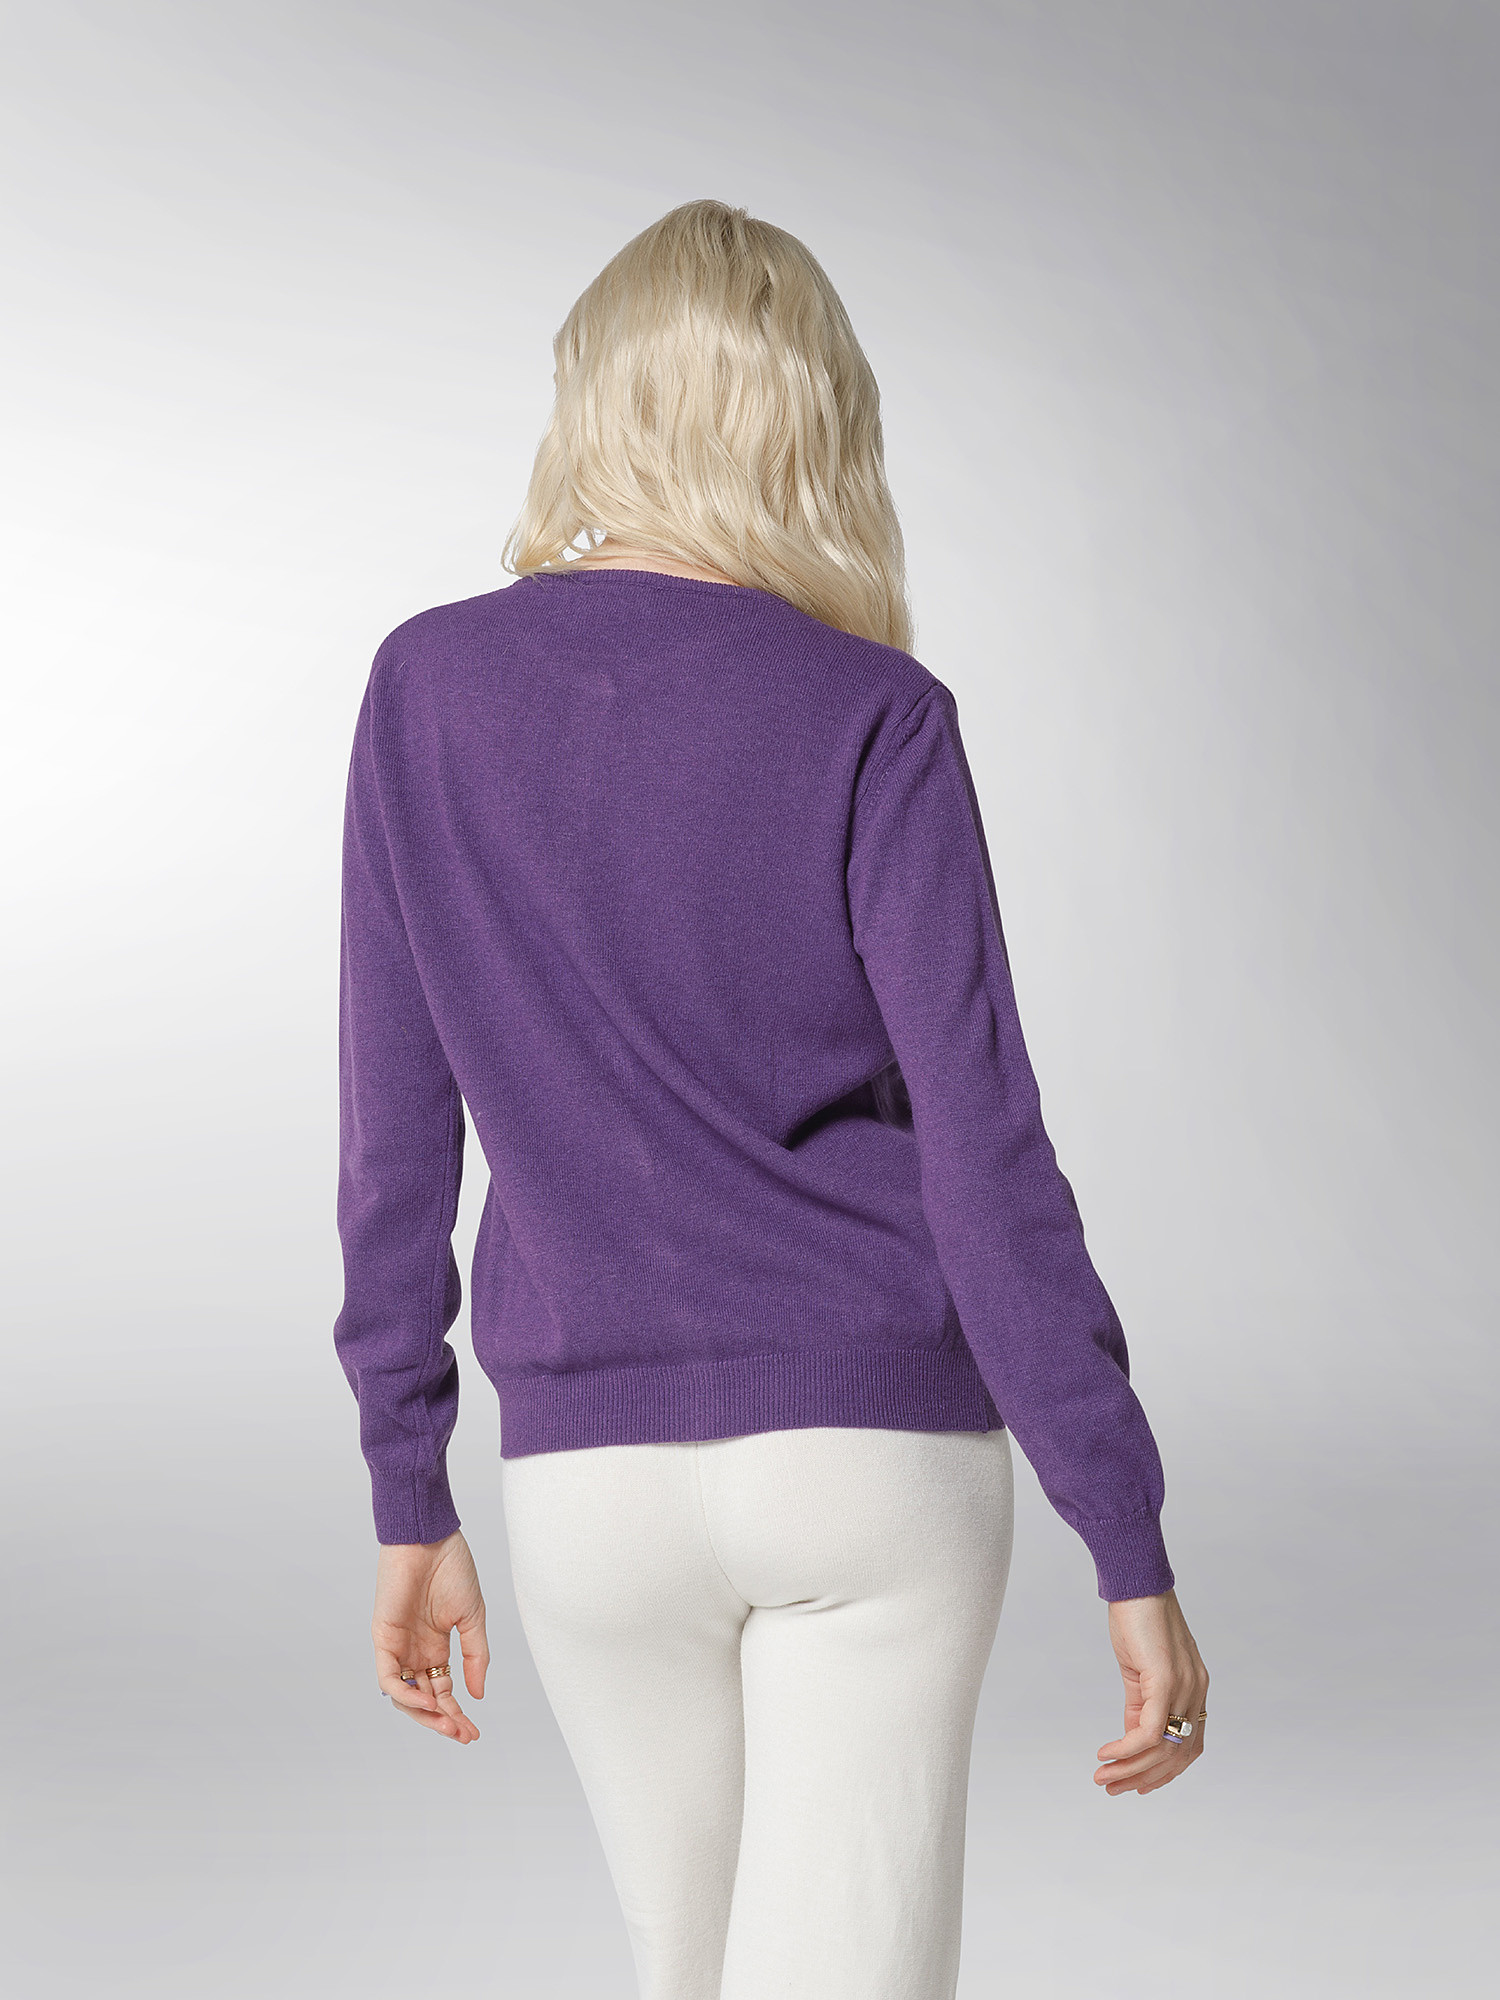 K Collection - Cardigan, Purple, large image number 5